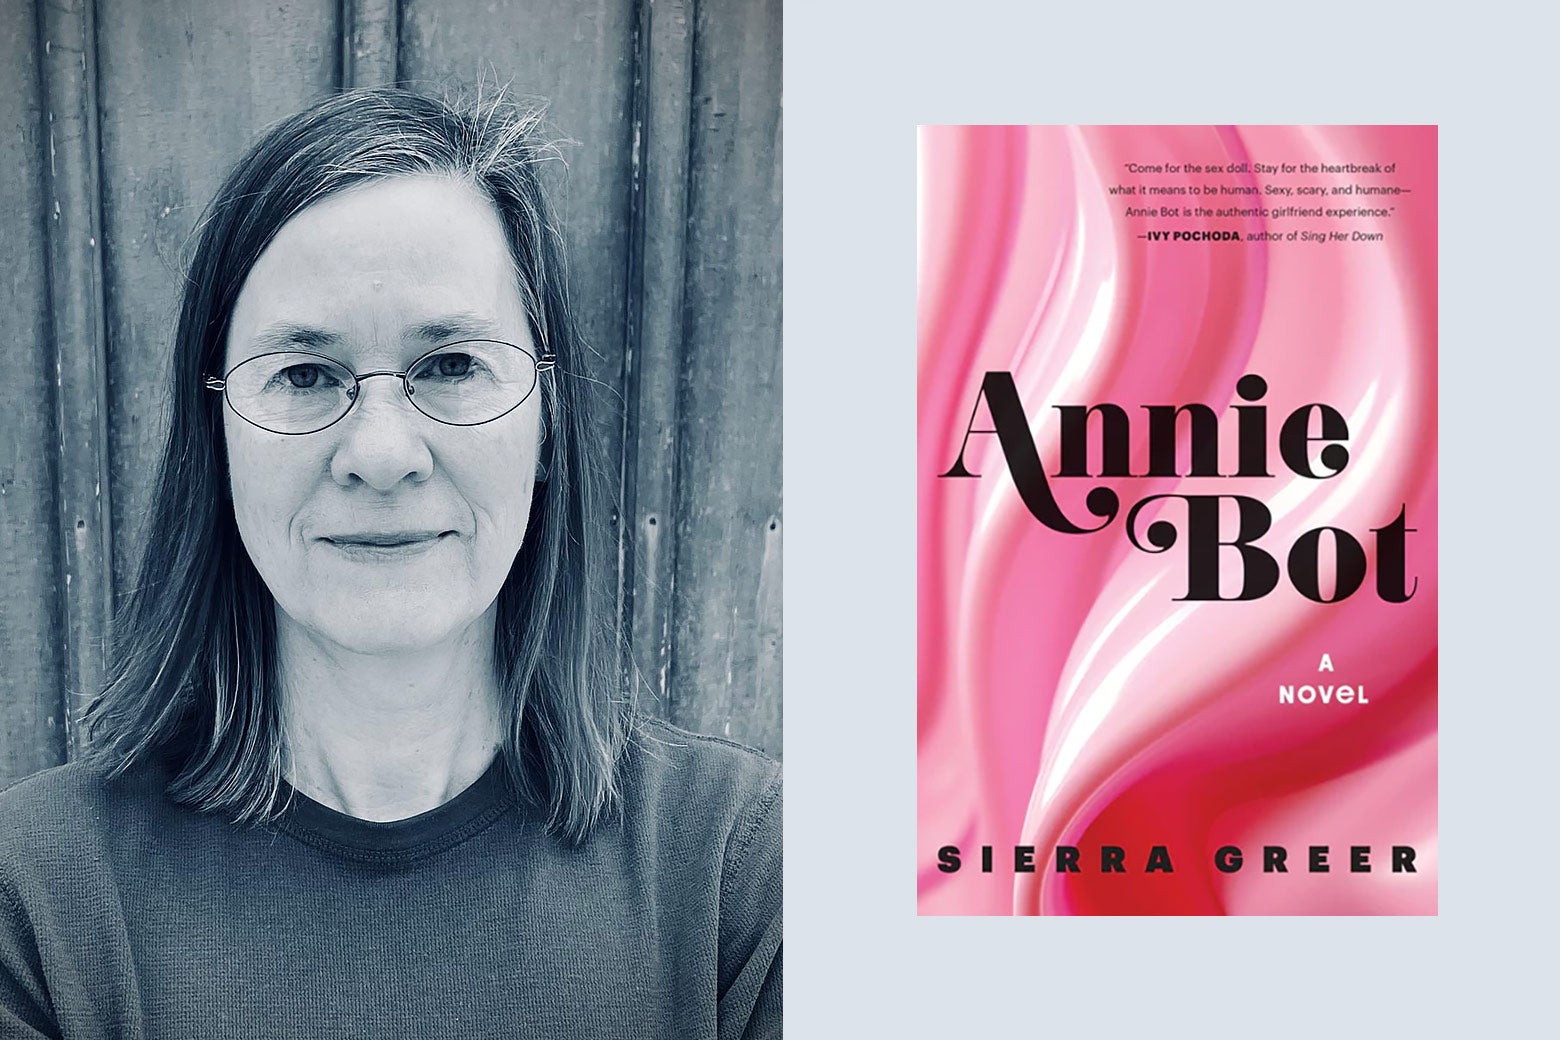 Author Sierra Greer and her debut novel, Annie Bot